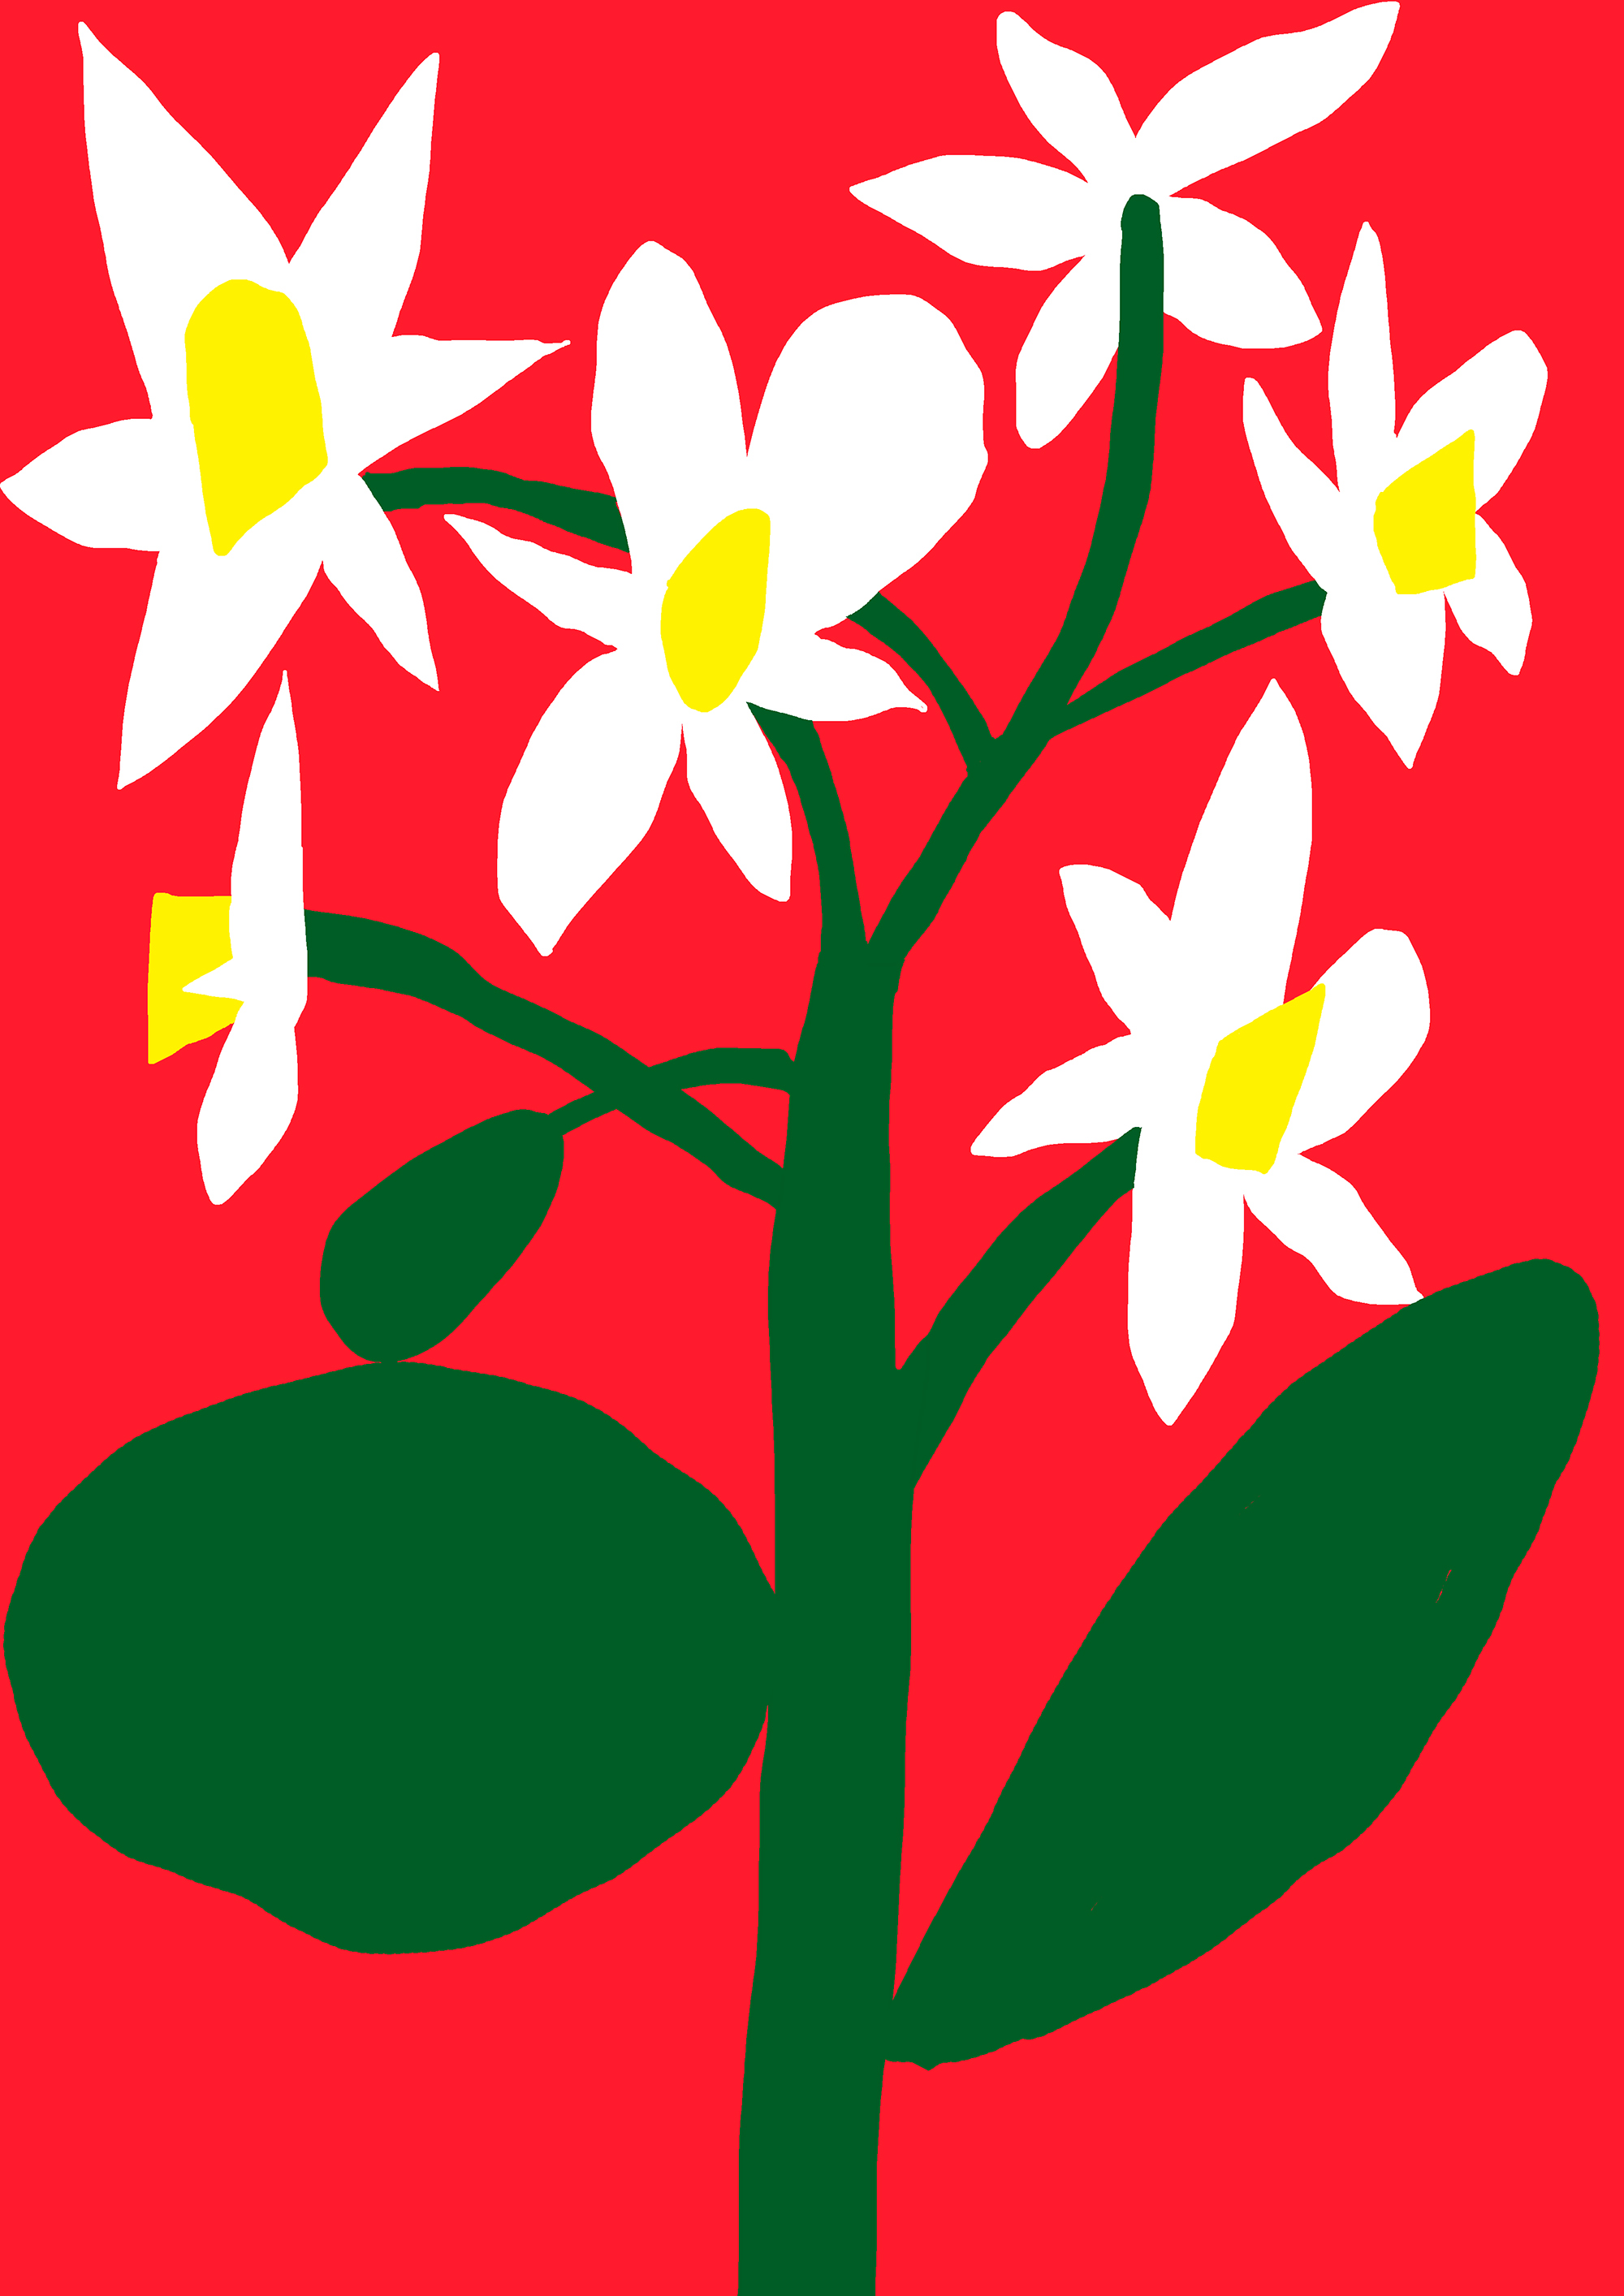 White Flower on Red Background by Antti Kalevi | Agent Pekka